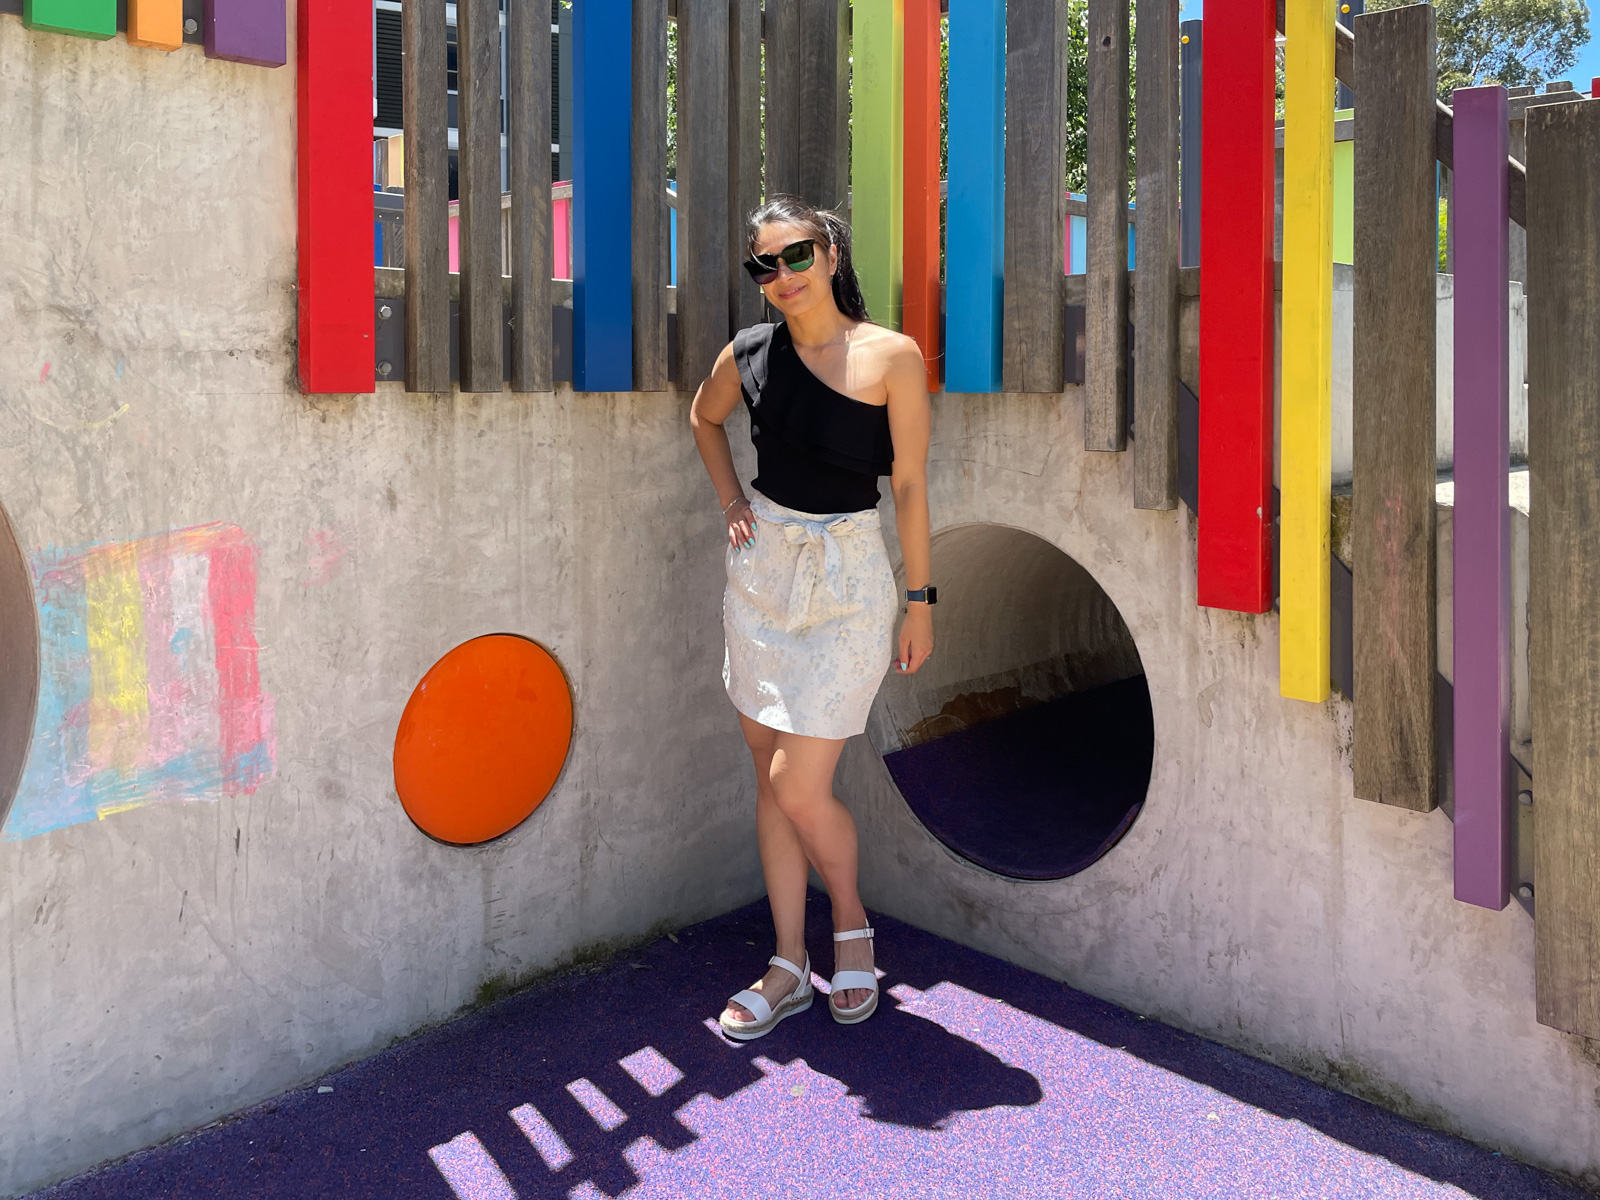 A woman wearing a black top with one shoulder, a floral white skirt and white platform sandals. She has black sunglasses on and has a hand on her hip. She is standing in front of a concrete children’s play structure with colourful wooden panels.